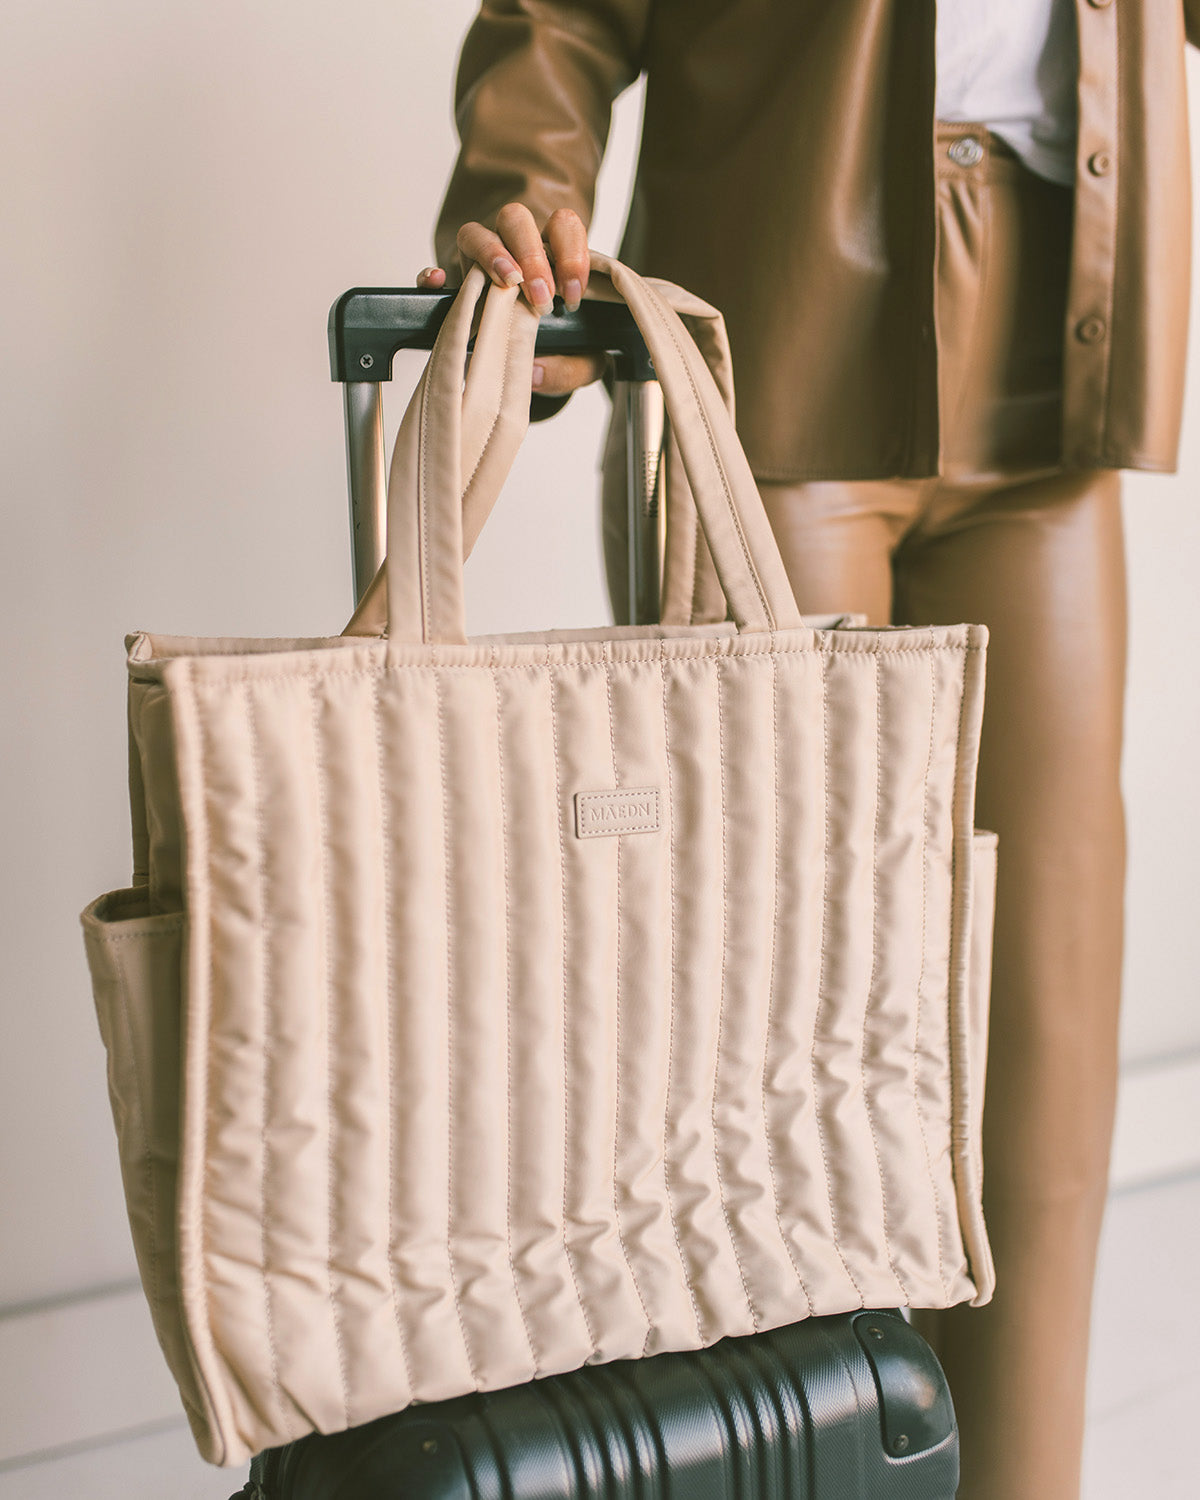 Maedn Bags - Oat Cream quilted tote